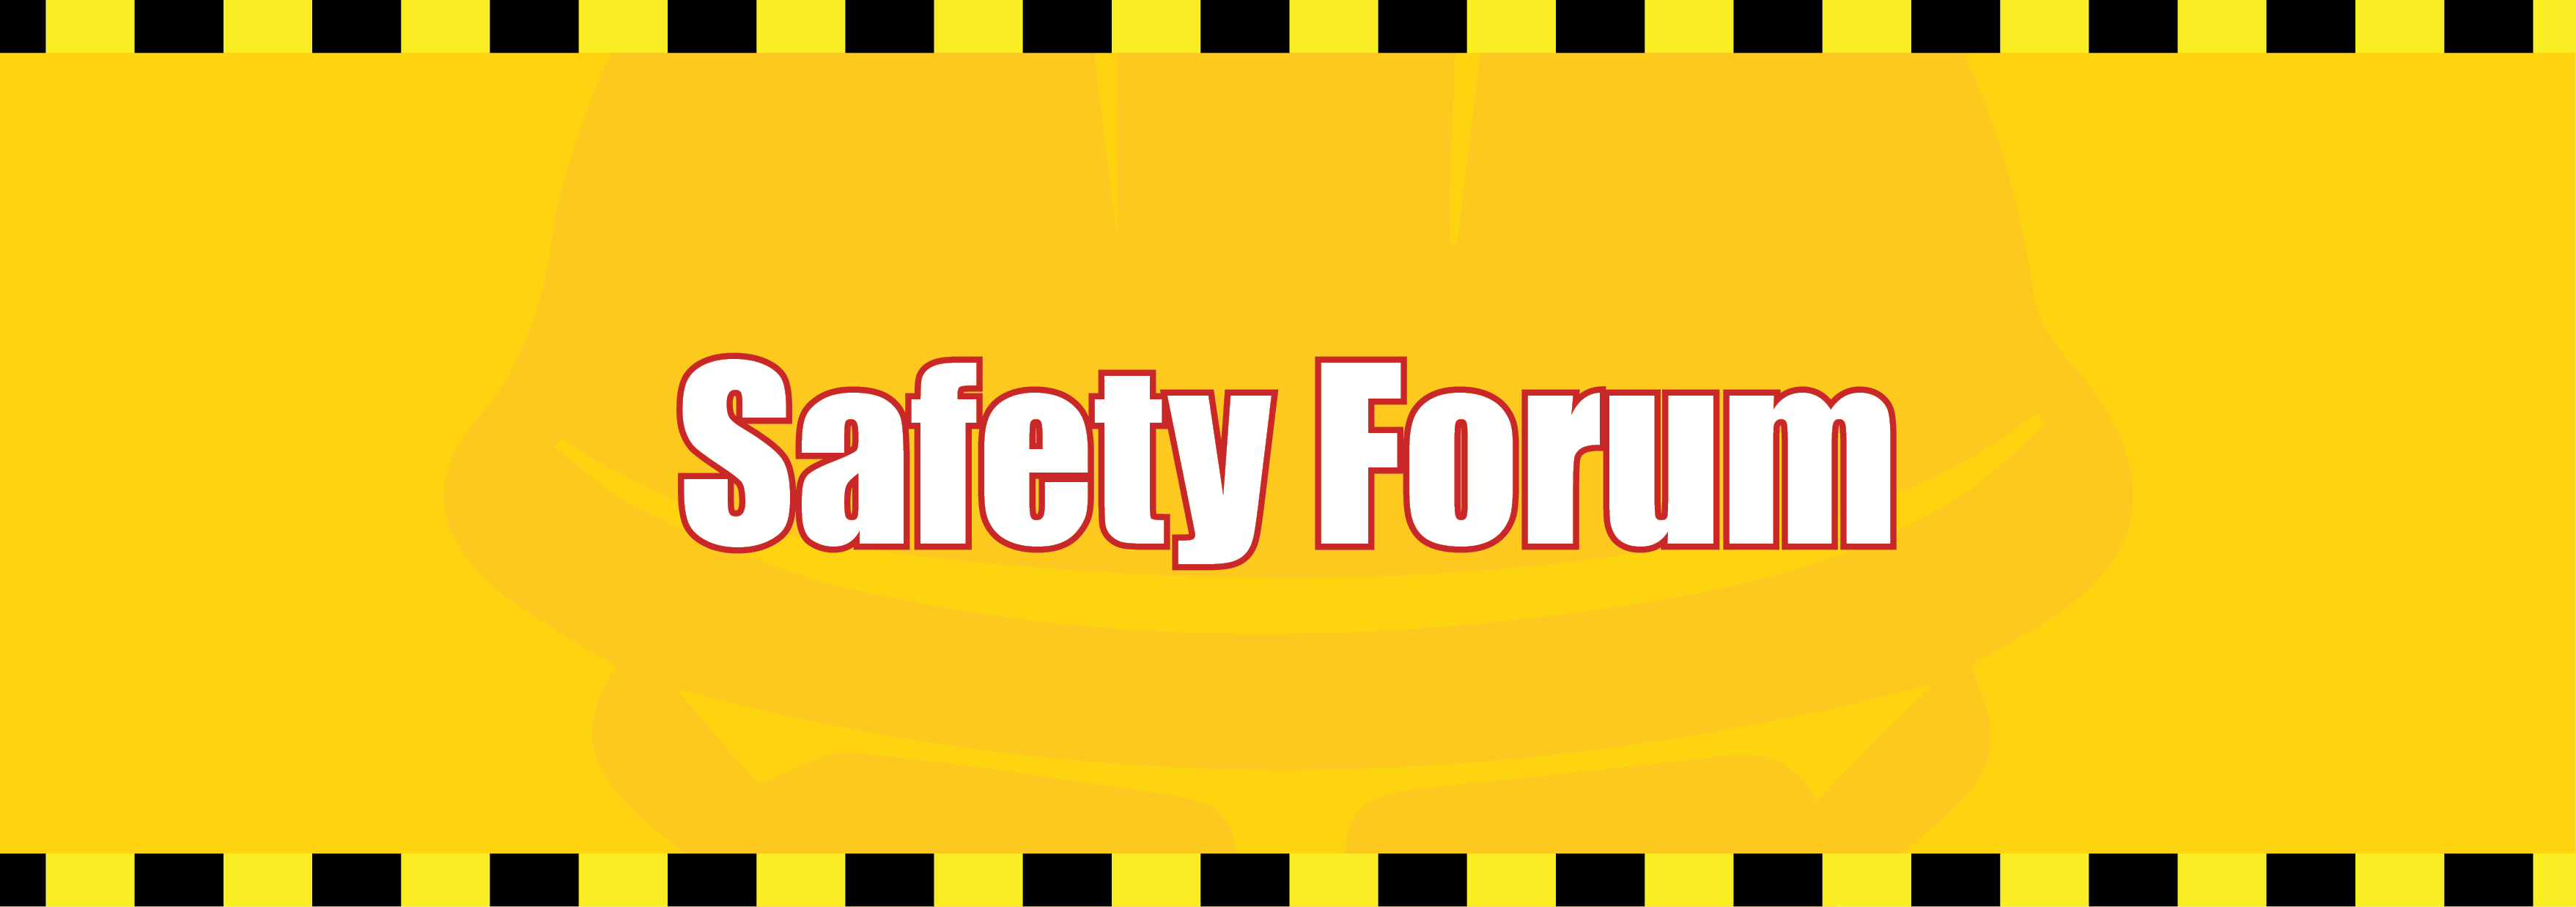 Monthly Safety Forum - Confined Space